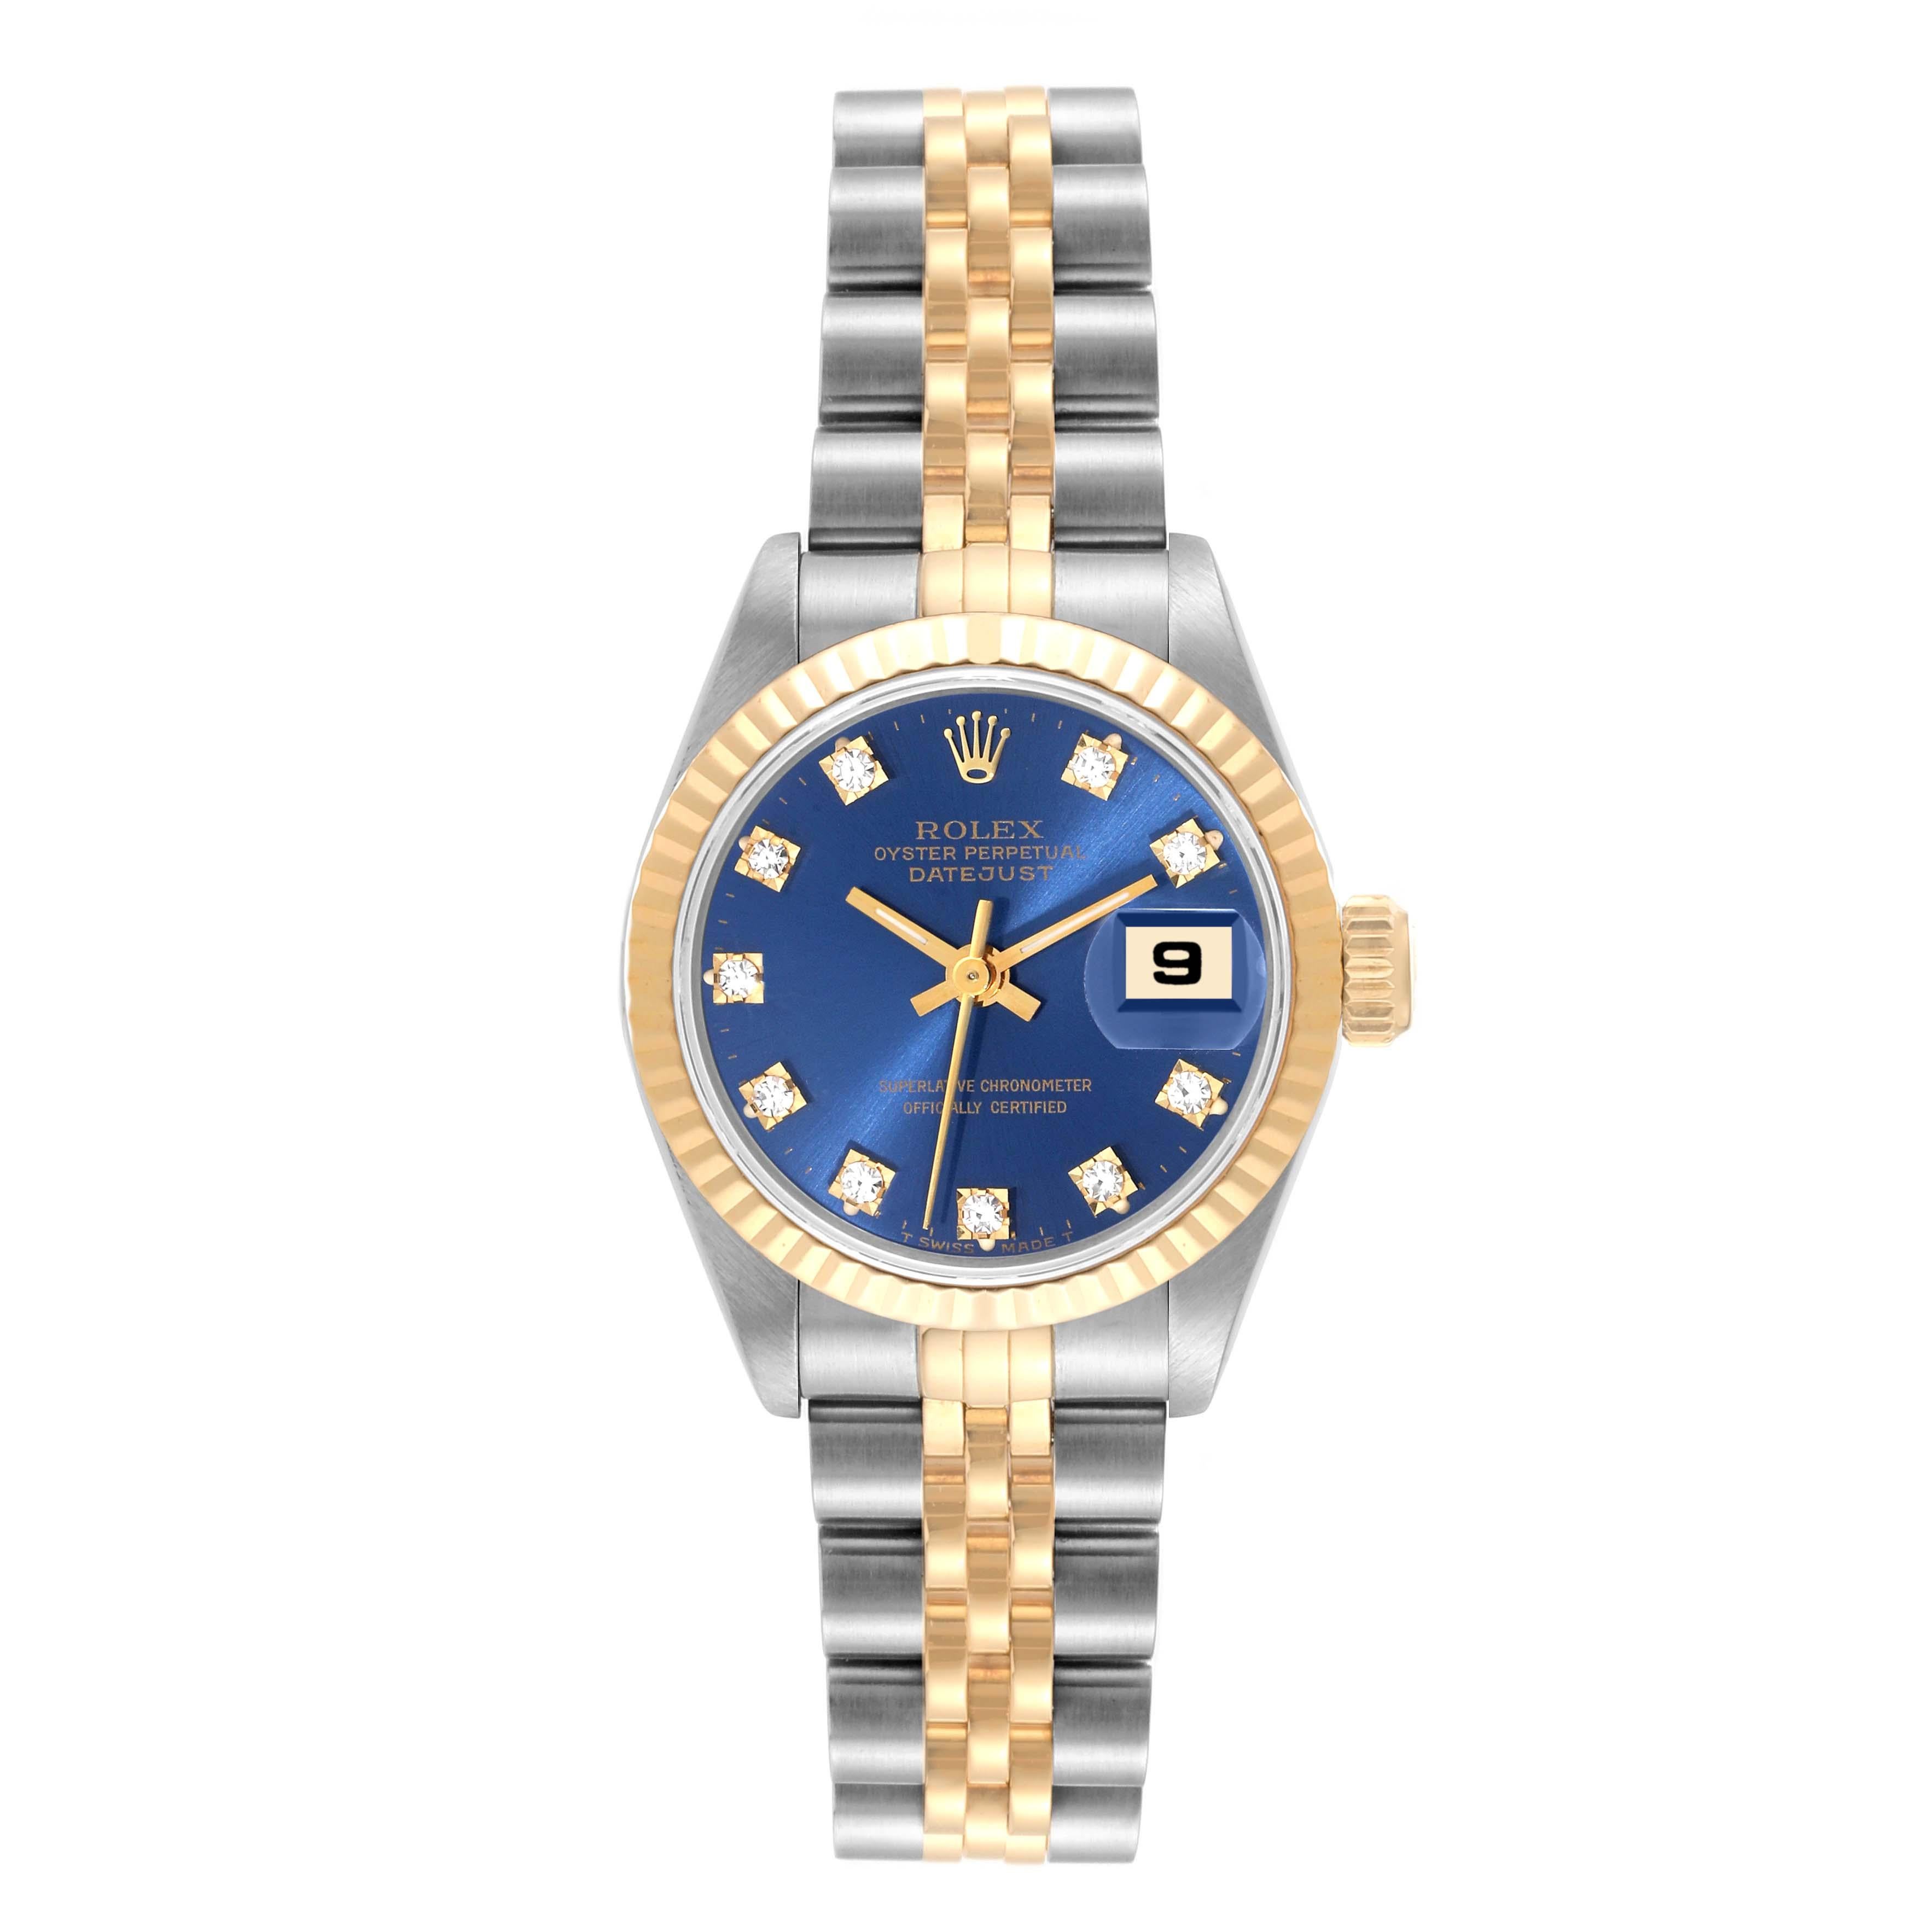 Rolex Datejust Blue Diamond Dial Steel Yellow Gold Ladies Watch 69173. Officially certified chronometer automatic self-winding movement. Stainless steel oyster case 26.0 mm in diameter. Rolex logo on the crown. 18k yellow gold fluted bezel. Scratch